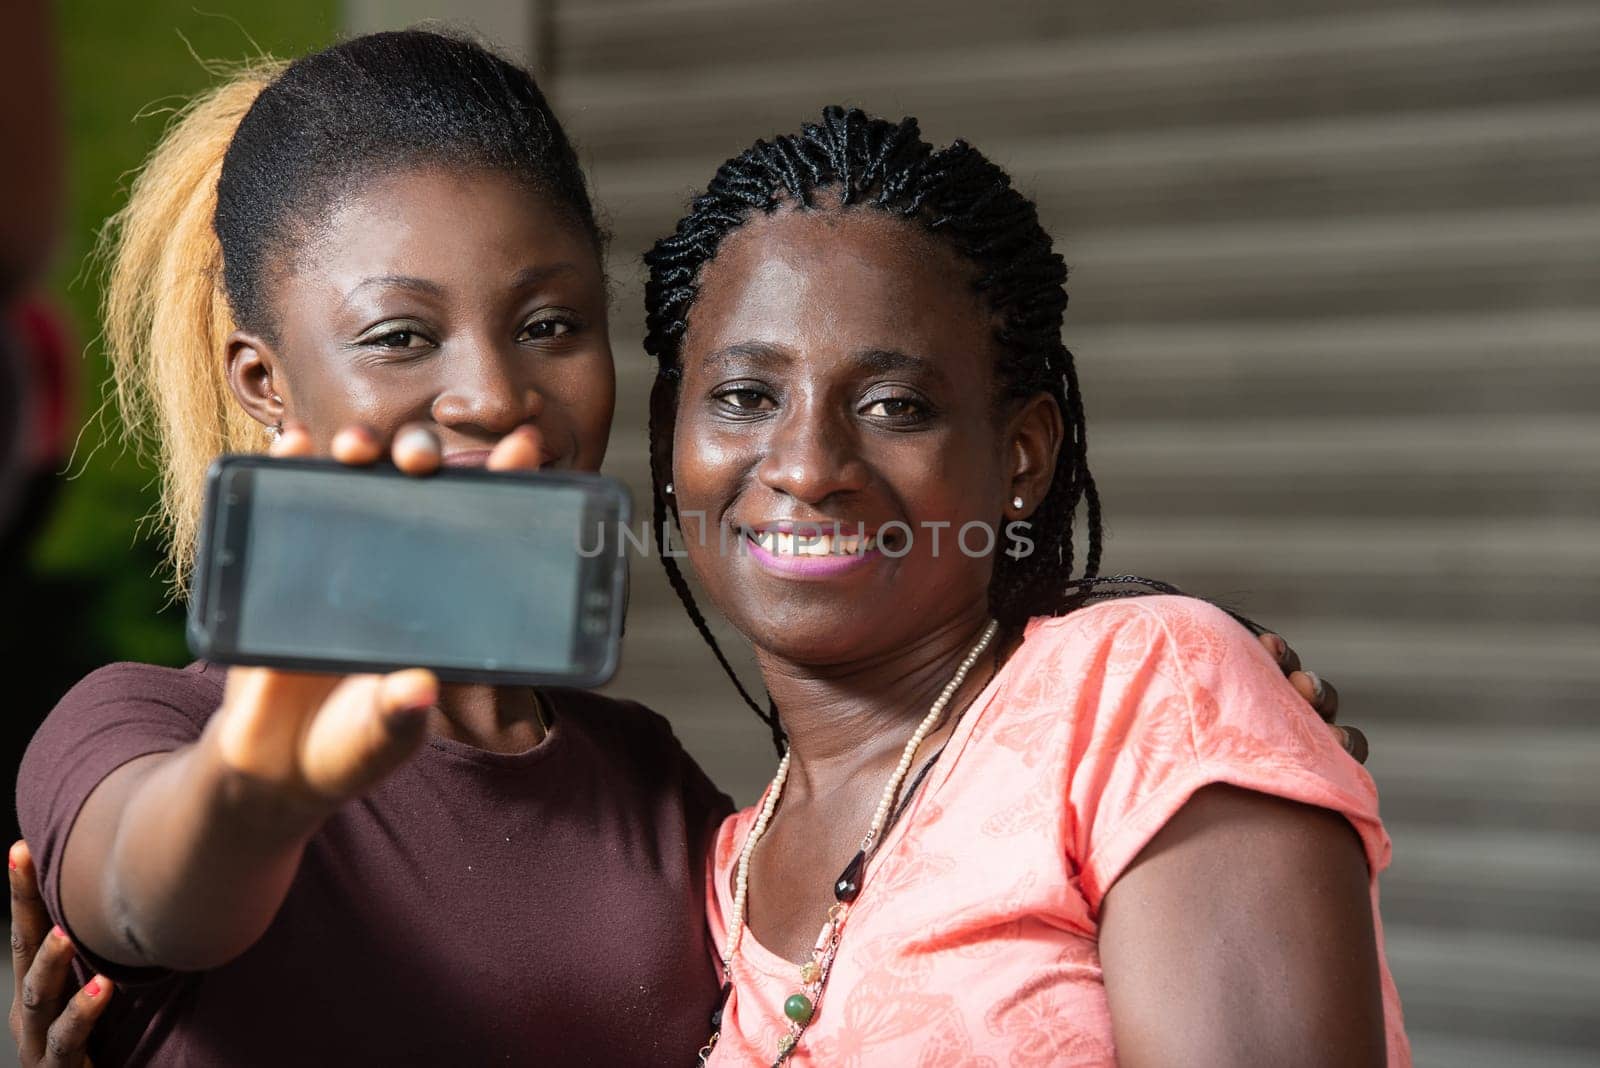 sitting girls showing the mobile phone screen smiling.